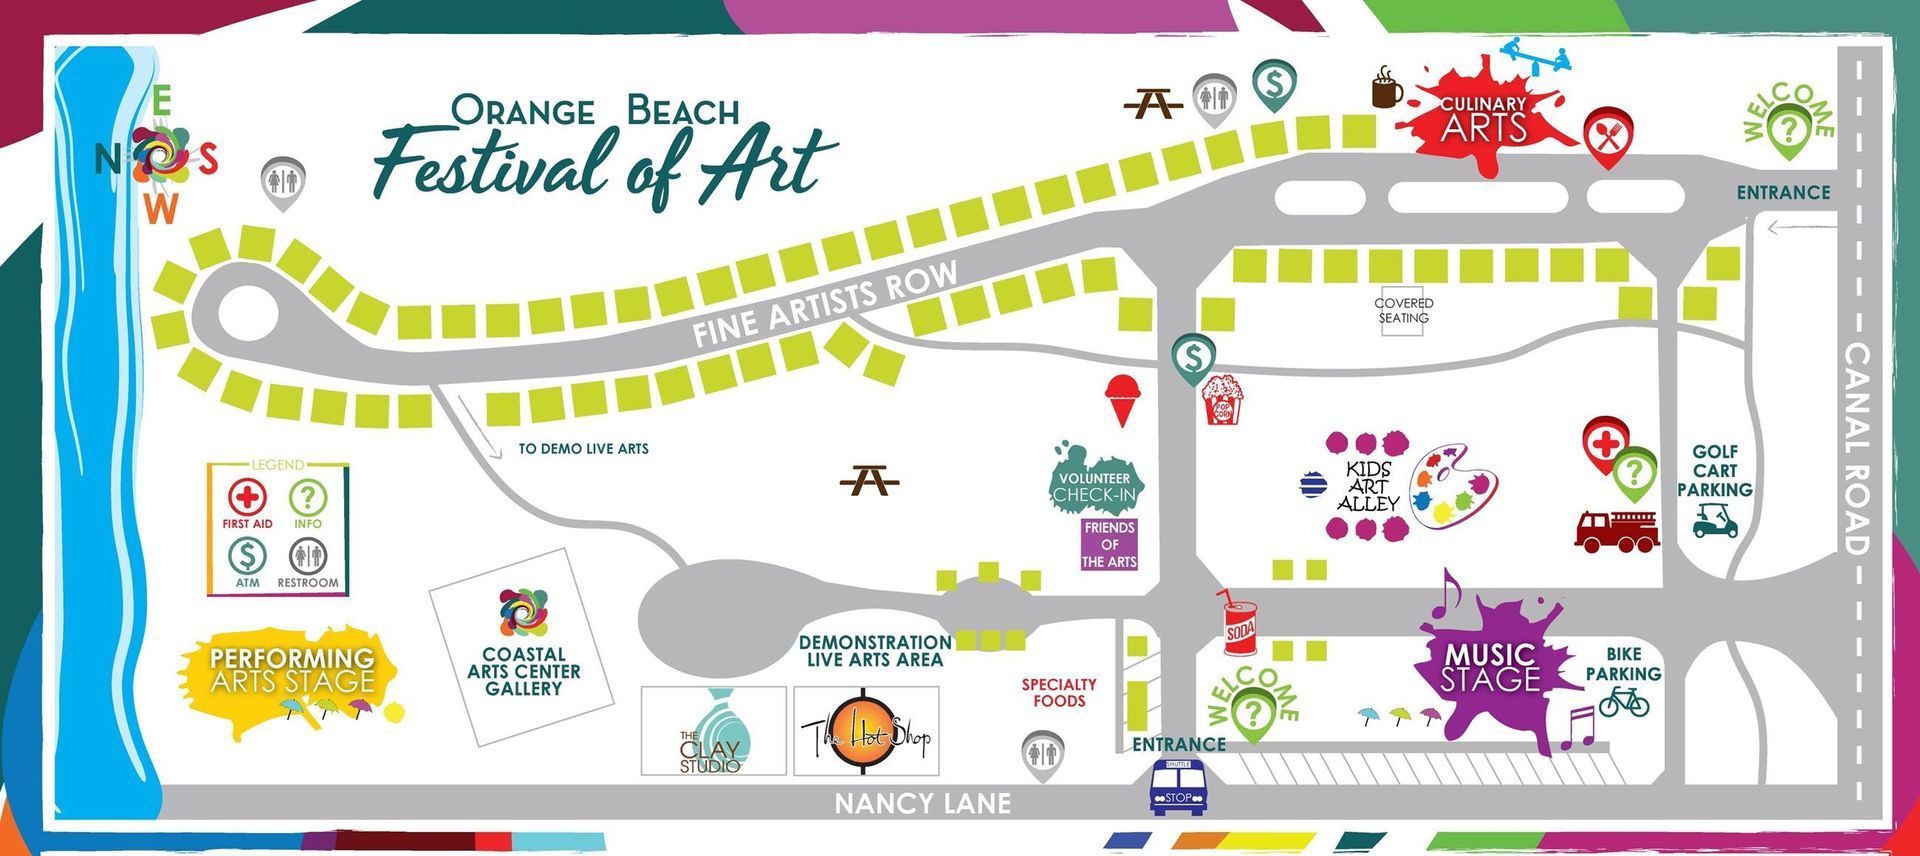 Orange Beach Festival of Art Ranked 25 in Nation by Artists